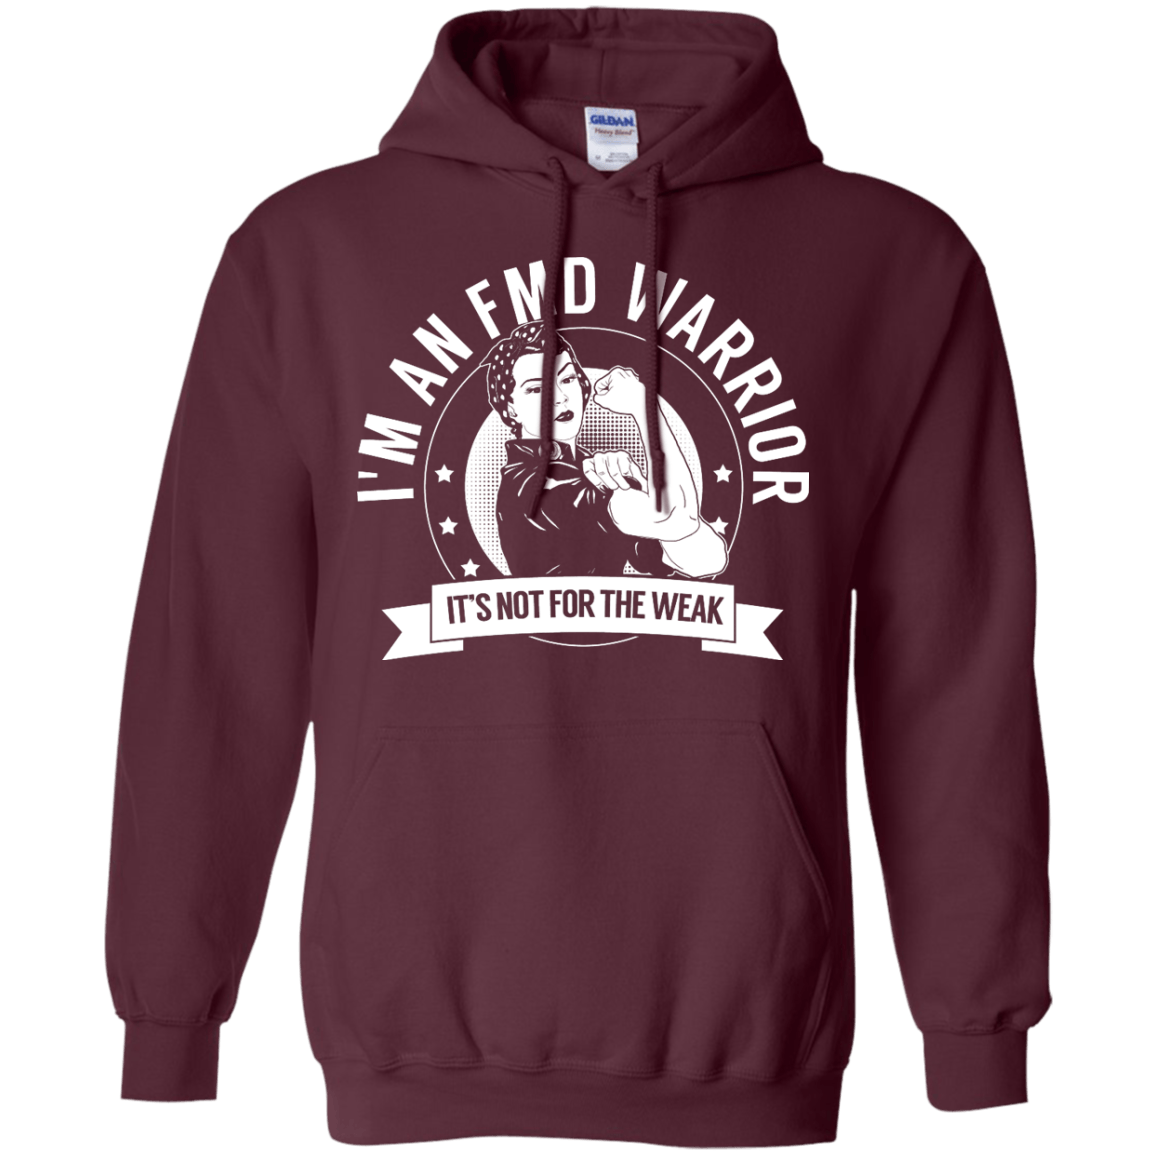 Fibromuscular Dysplasia - FMD Warrior Not For The Weak Pullover Hoodie 8 oz - The Unchargeables